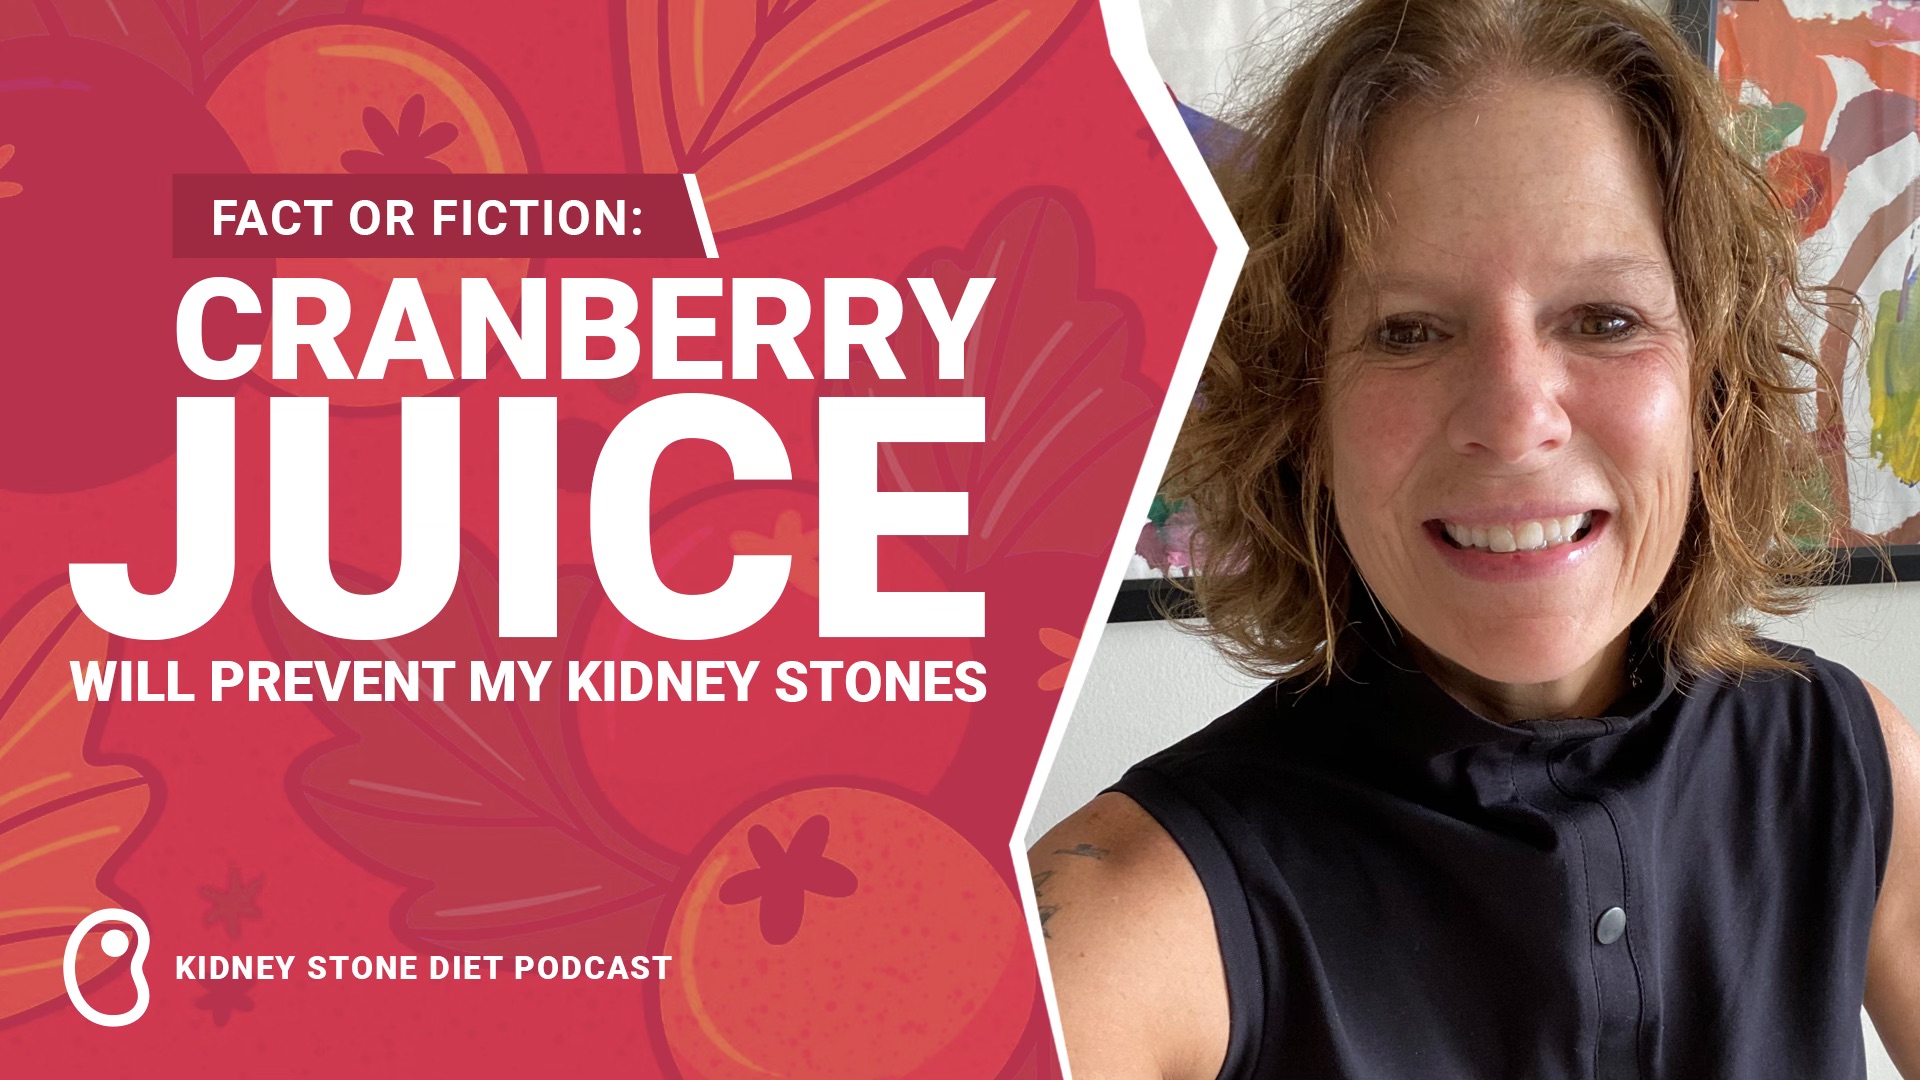 Fact or Fiction: Cranberry juice will prevent my kidney stones